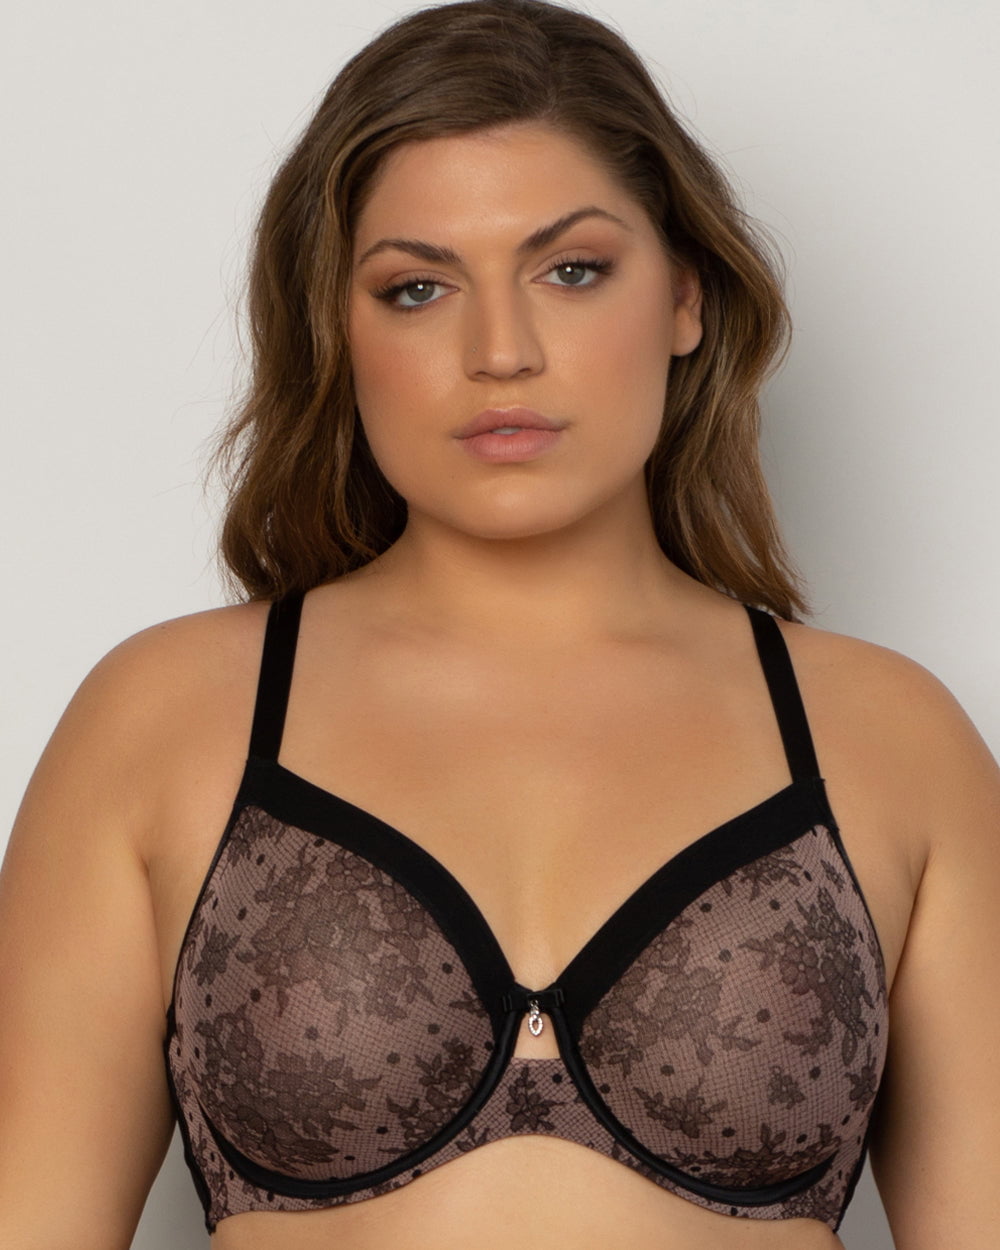 Sheer Mesh Full Coverage Unlined Underwire Bra Lavender, 51% OFF